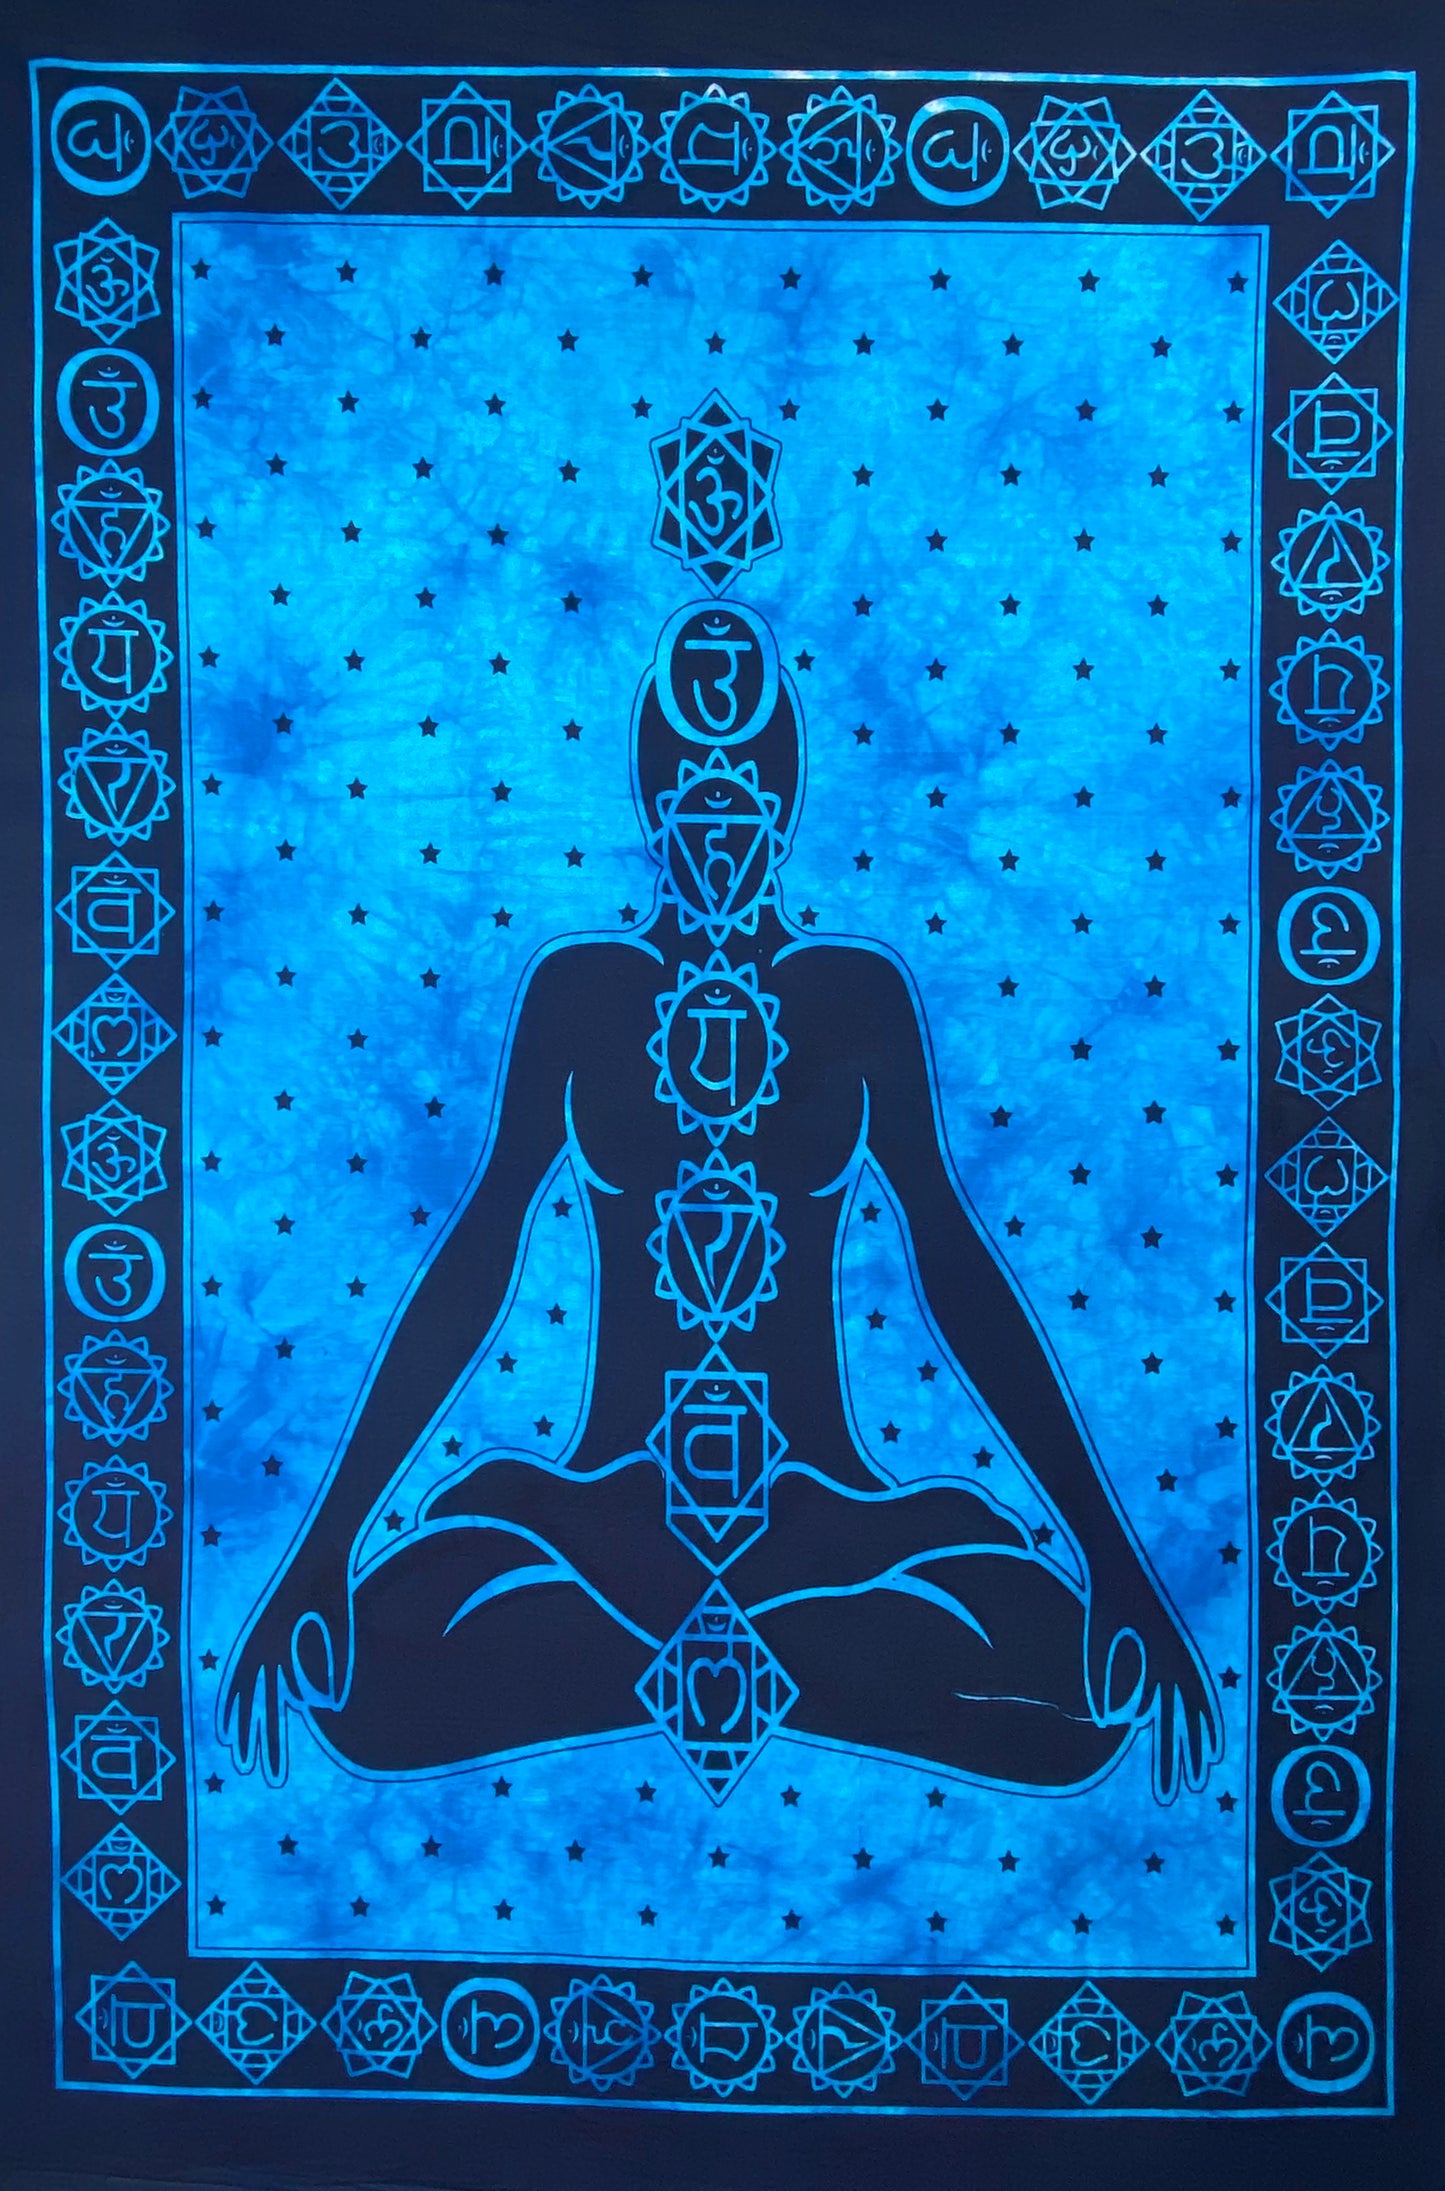 CHAKRA TAPESTRY - Poster size